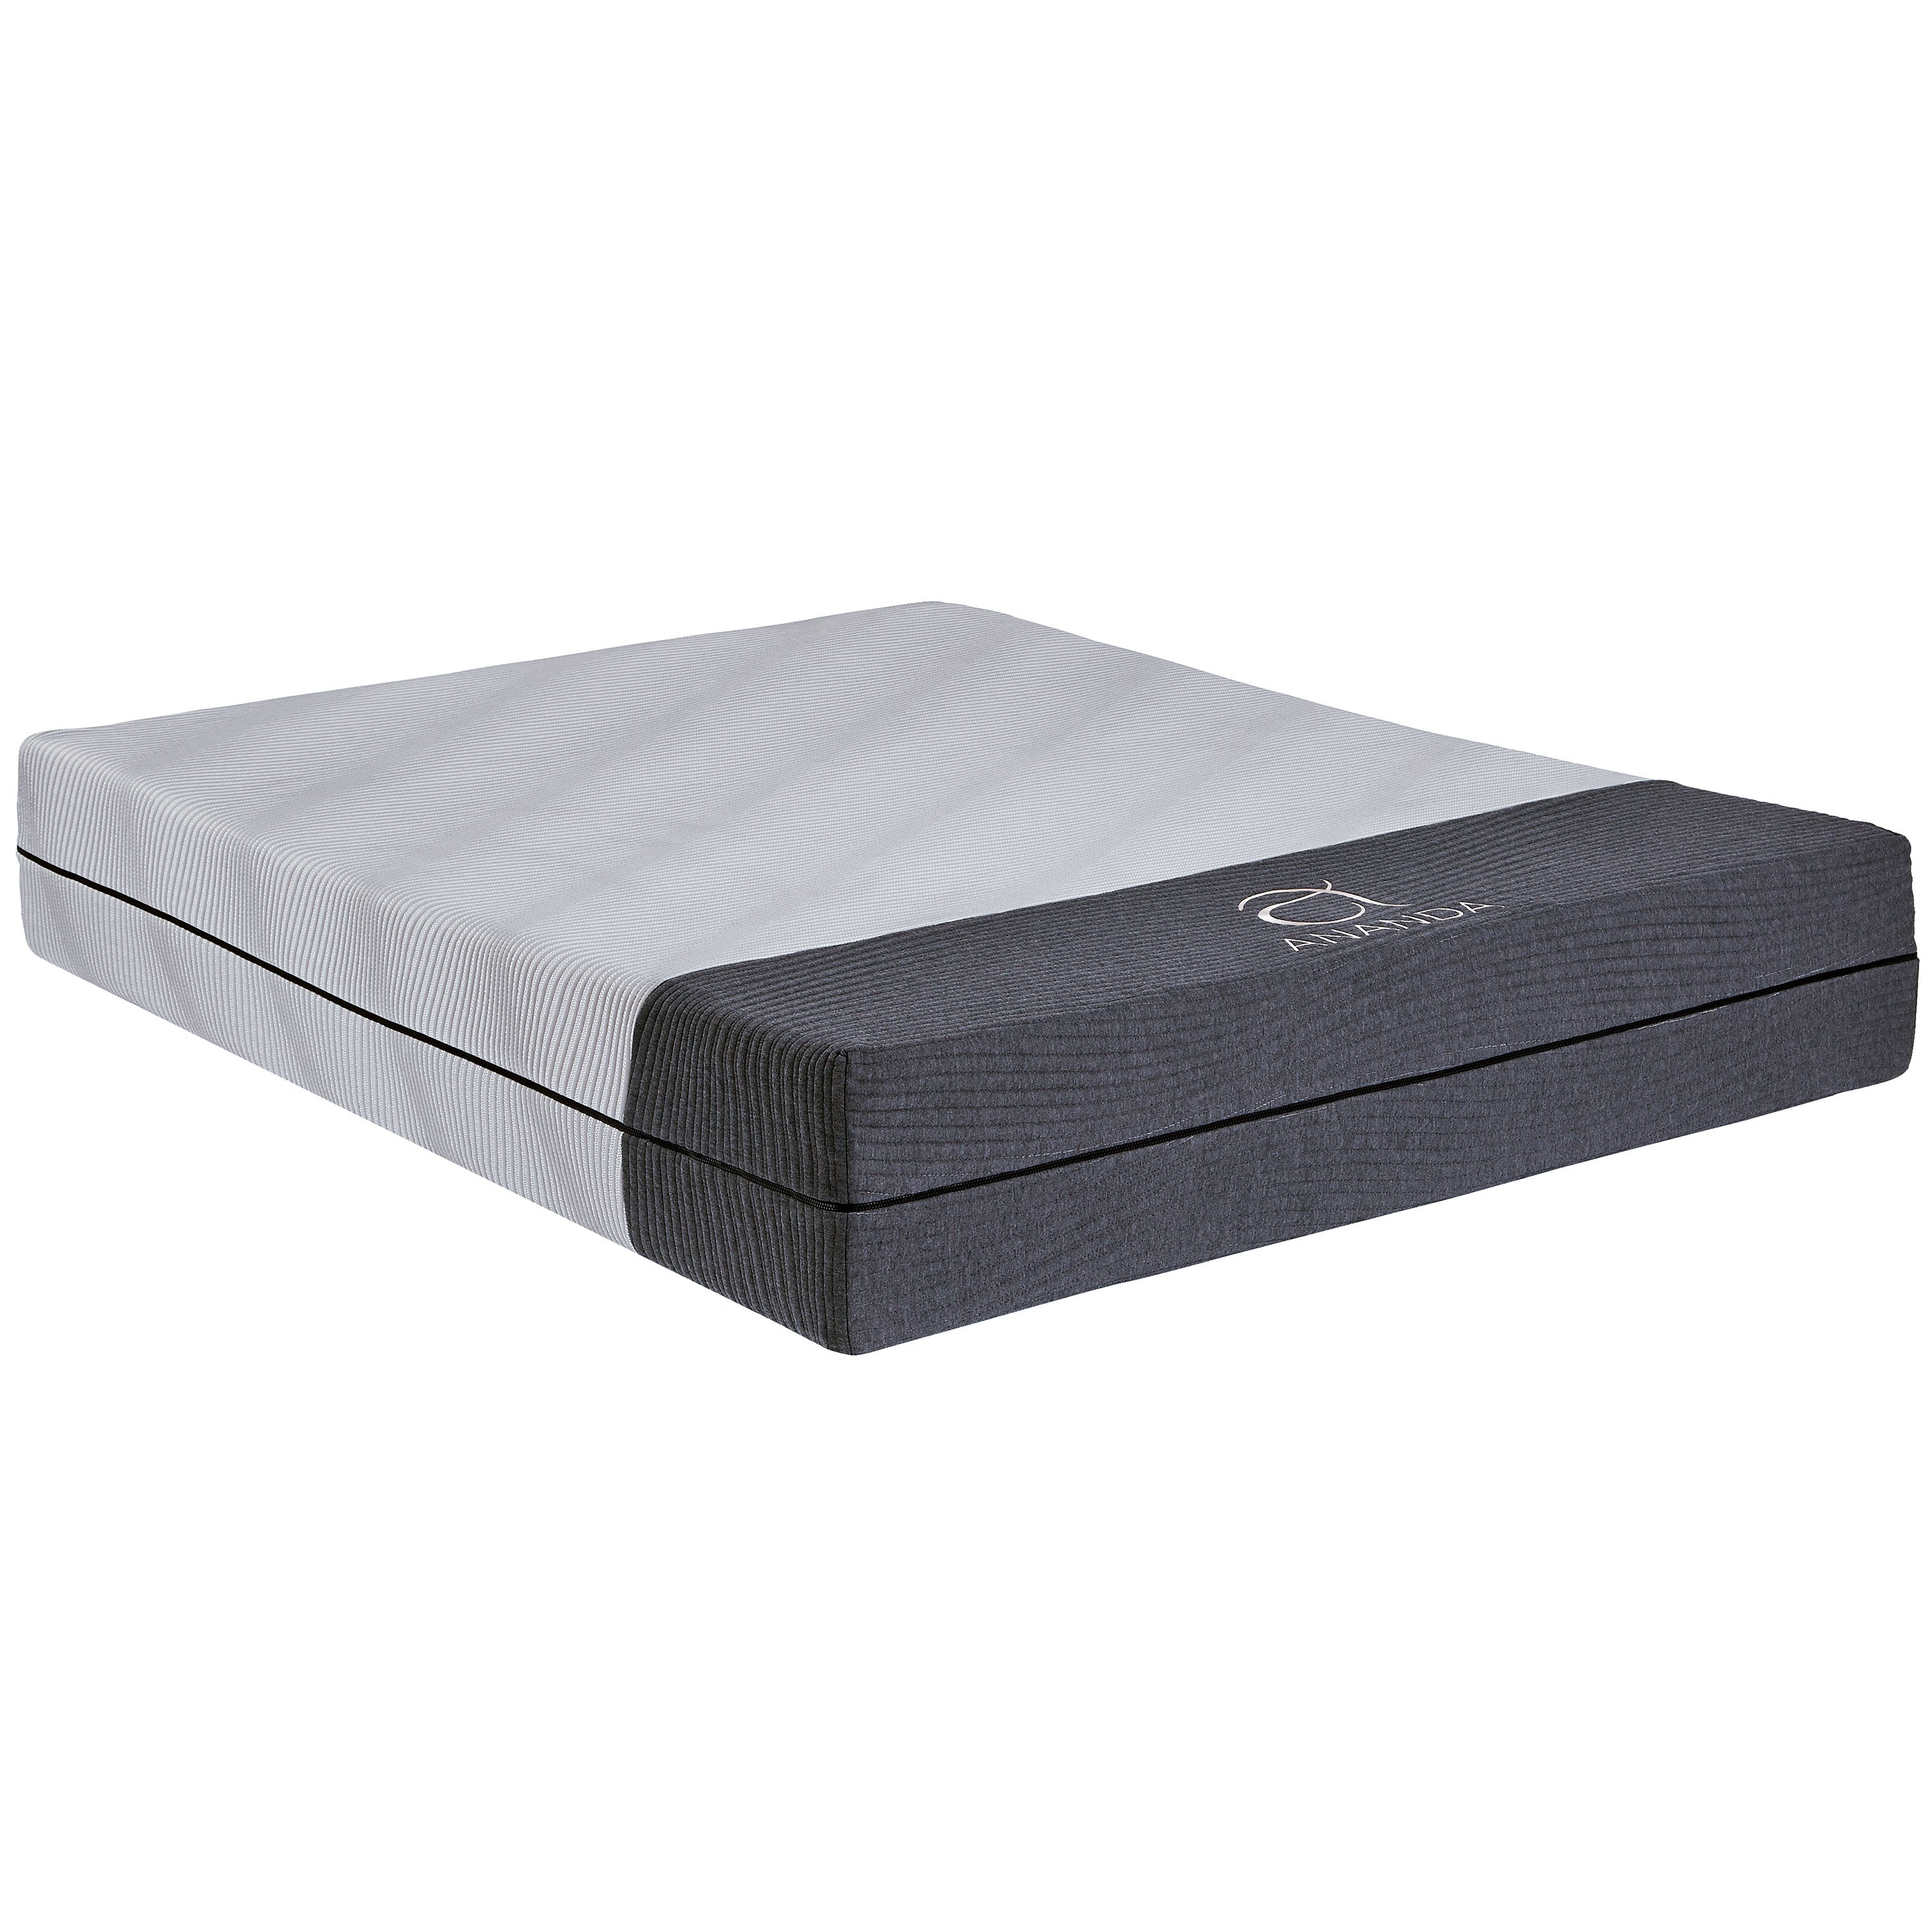 13" Ananda Cool Gel and Pearl Infused Hybrid Mattress with Ananda Head Tilt Adjustable Bed Base Combo Set - BlissfulNights.com